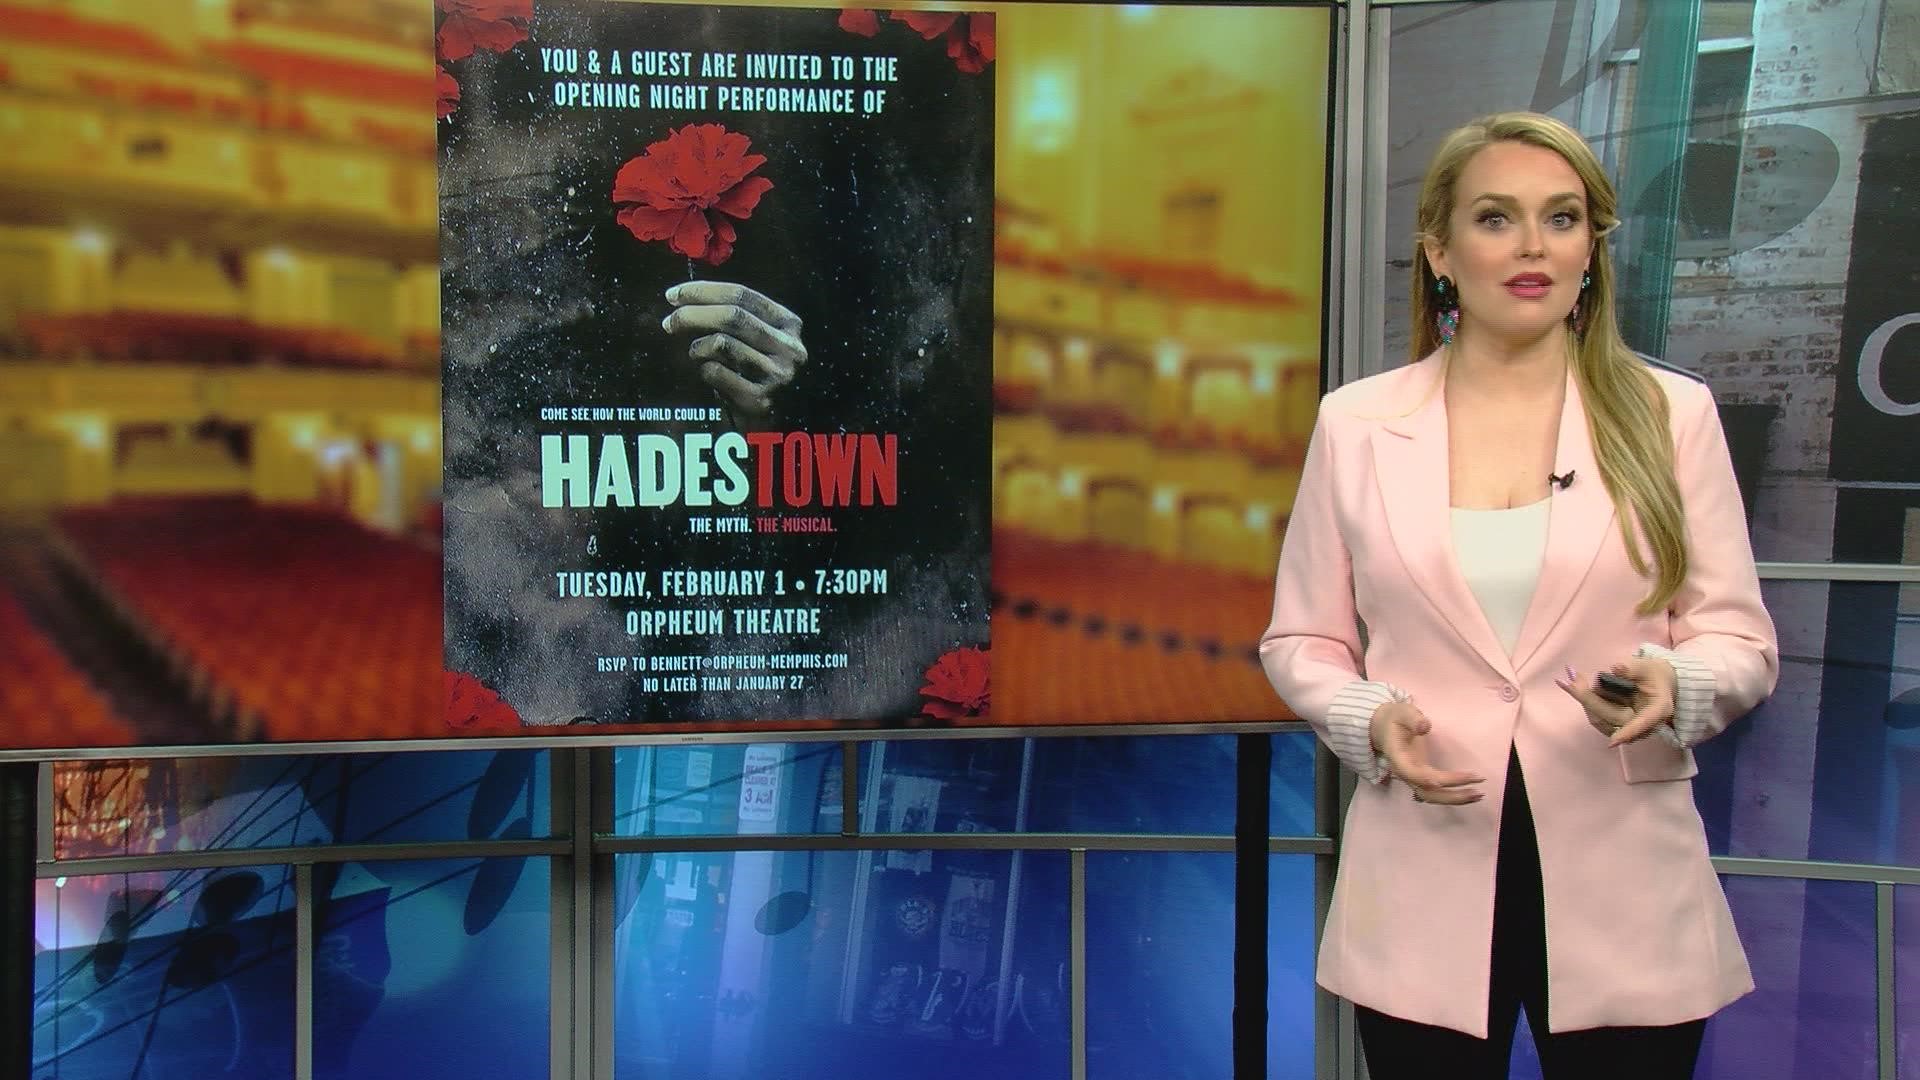 Hadestown is a new take on the classic Greek myth of Orpheus and Eurydice